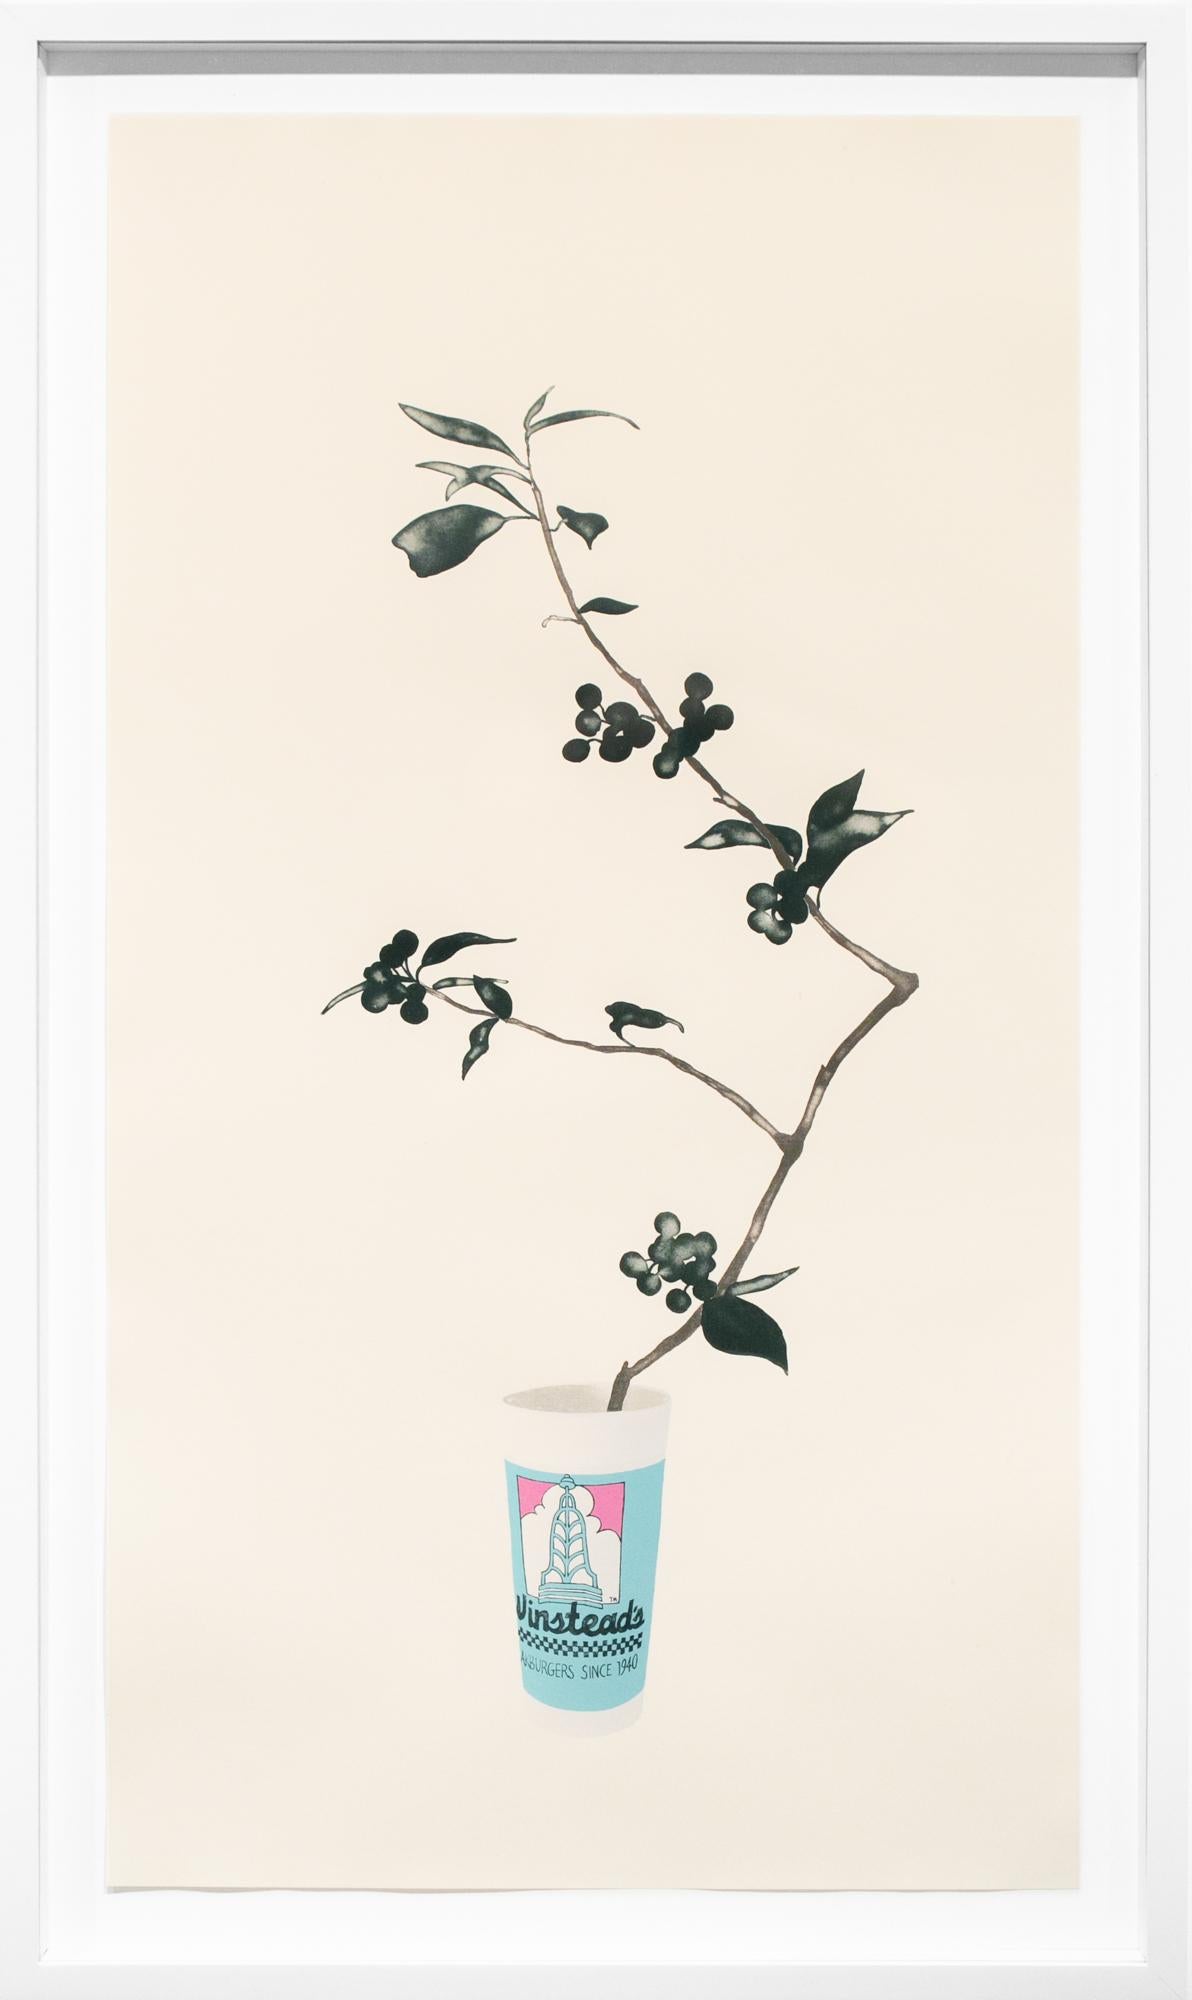 Yoonmi Nam Still-Life Print - "Winstead's", Floral, Fast Food Container, Lithograph, Beige, Grey, Blue, Pink